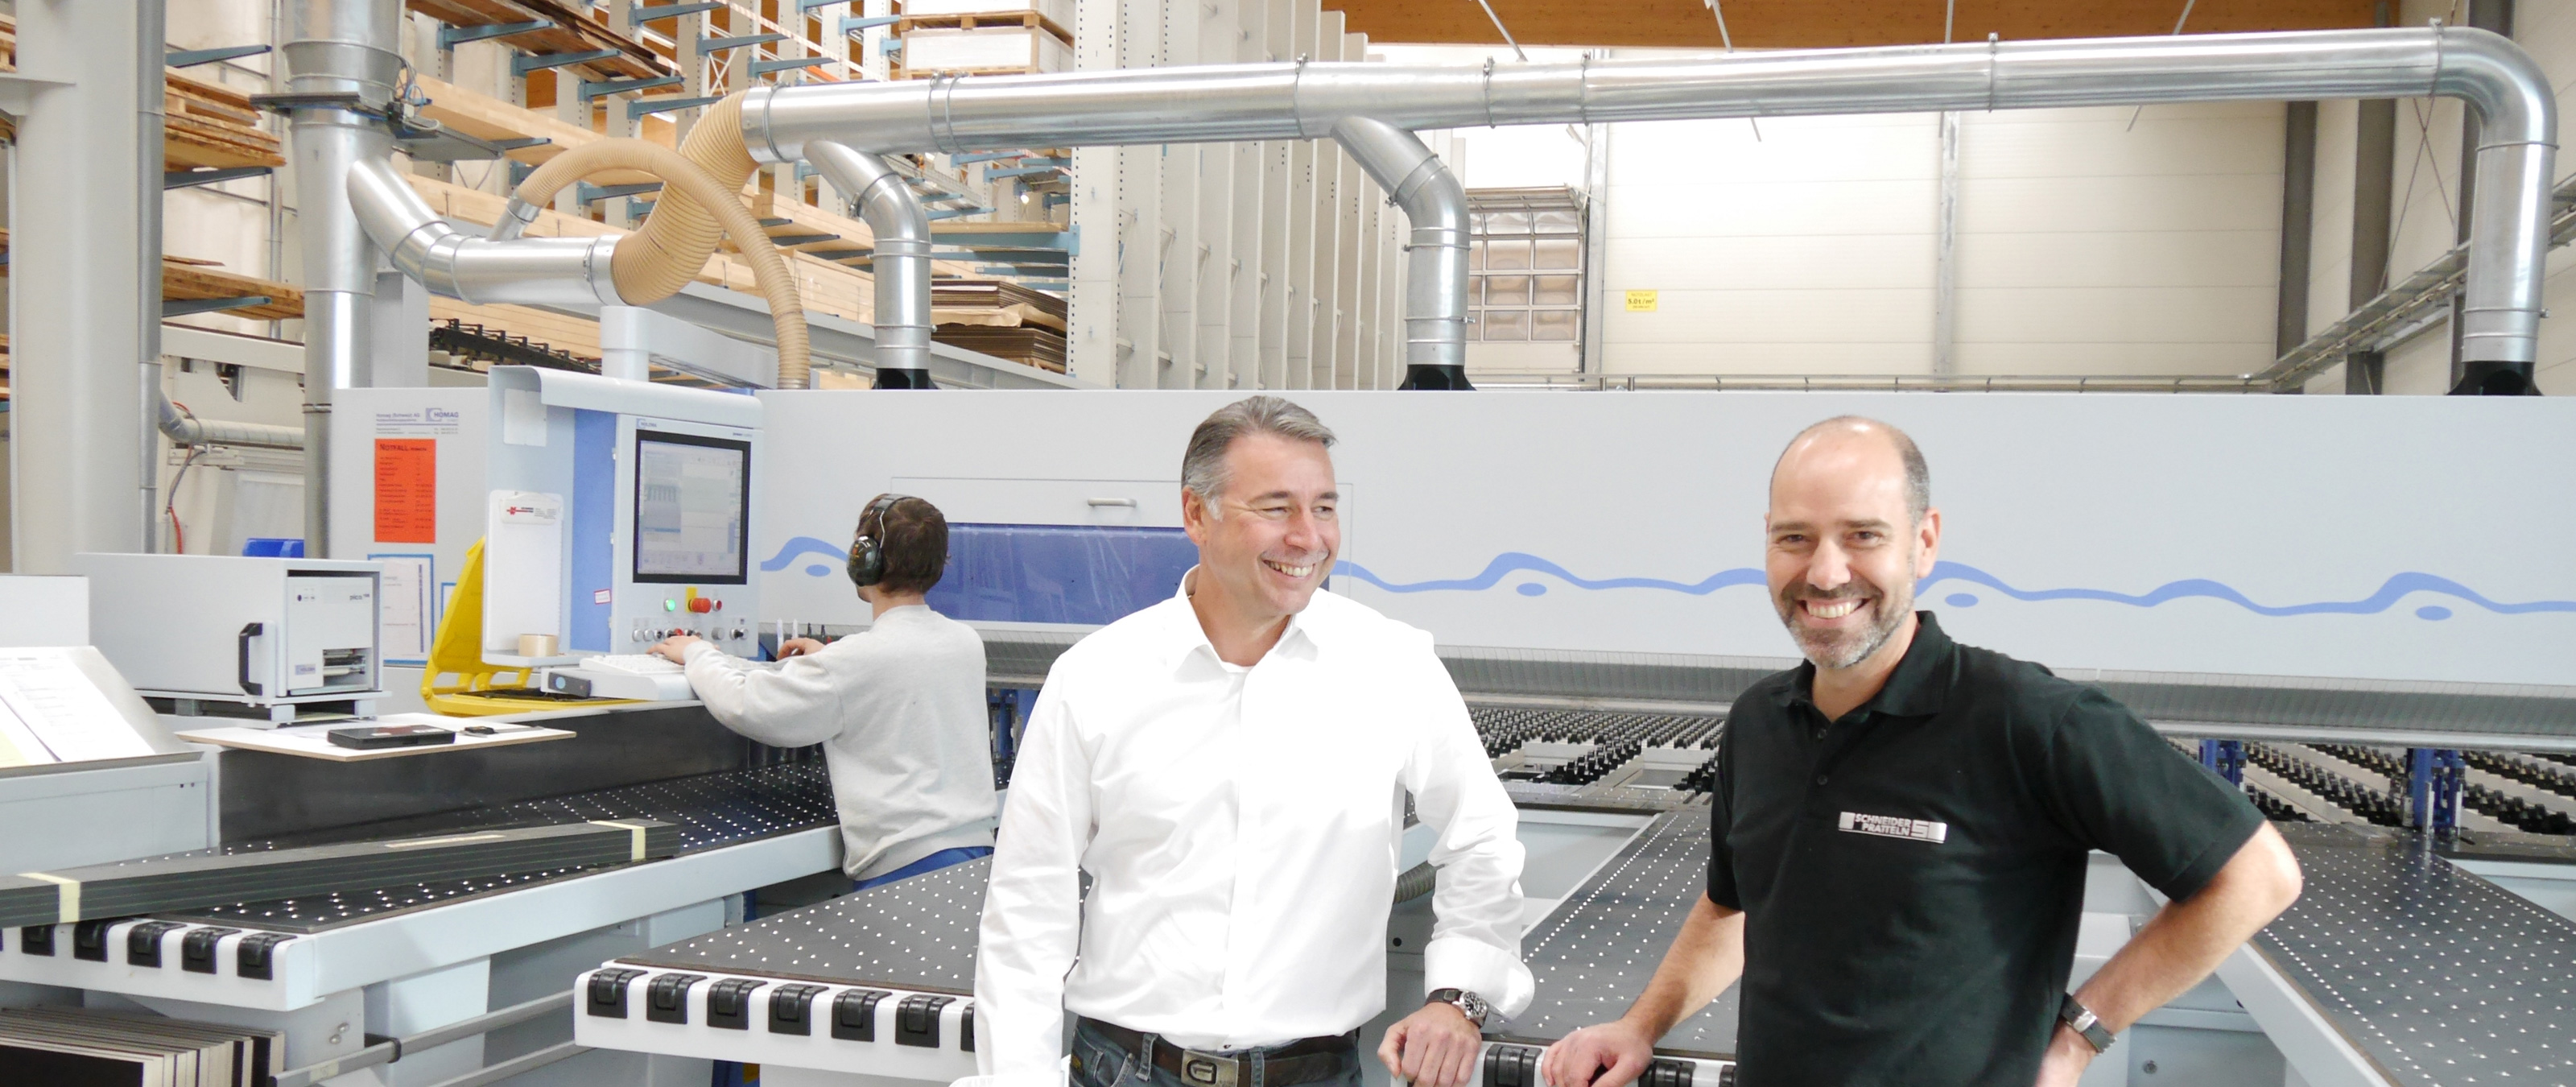 The Schneider Holding AG, located near Basel in Switzerland, makes no compromises. Perfection is a guiding principle of the company and has led it to build a completely new production facility – and equip it with machines from the HOMAG Group.